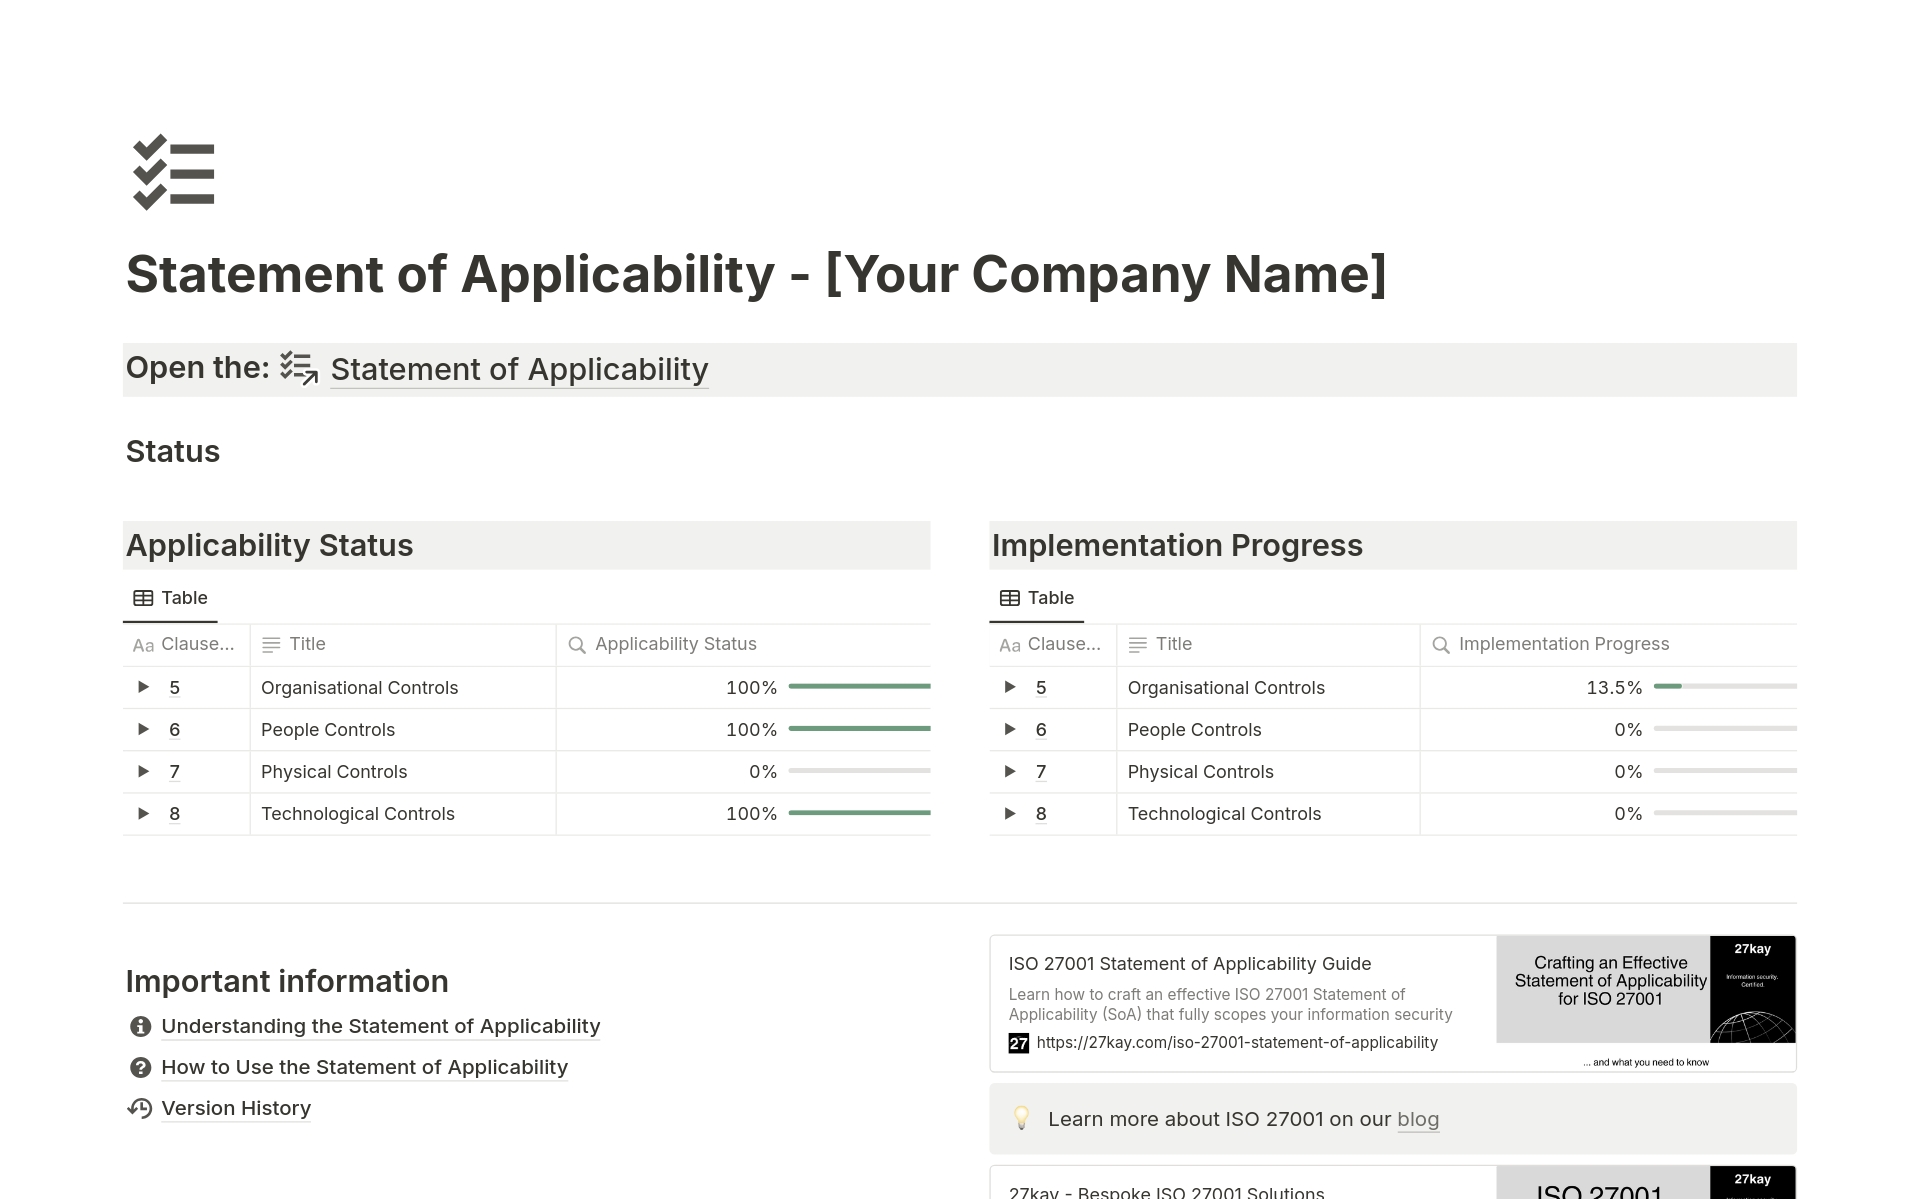 Kiss ISO 27001 paperwork woes goodbye! Master your Statement of Applicability with our streamlined Notion template. It's kinda fun.